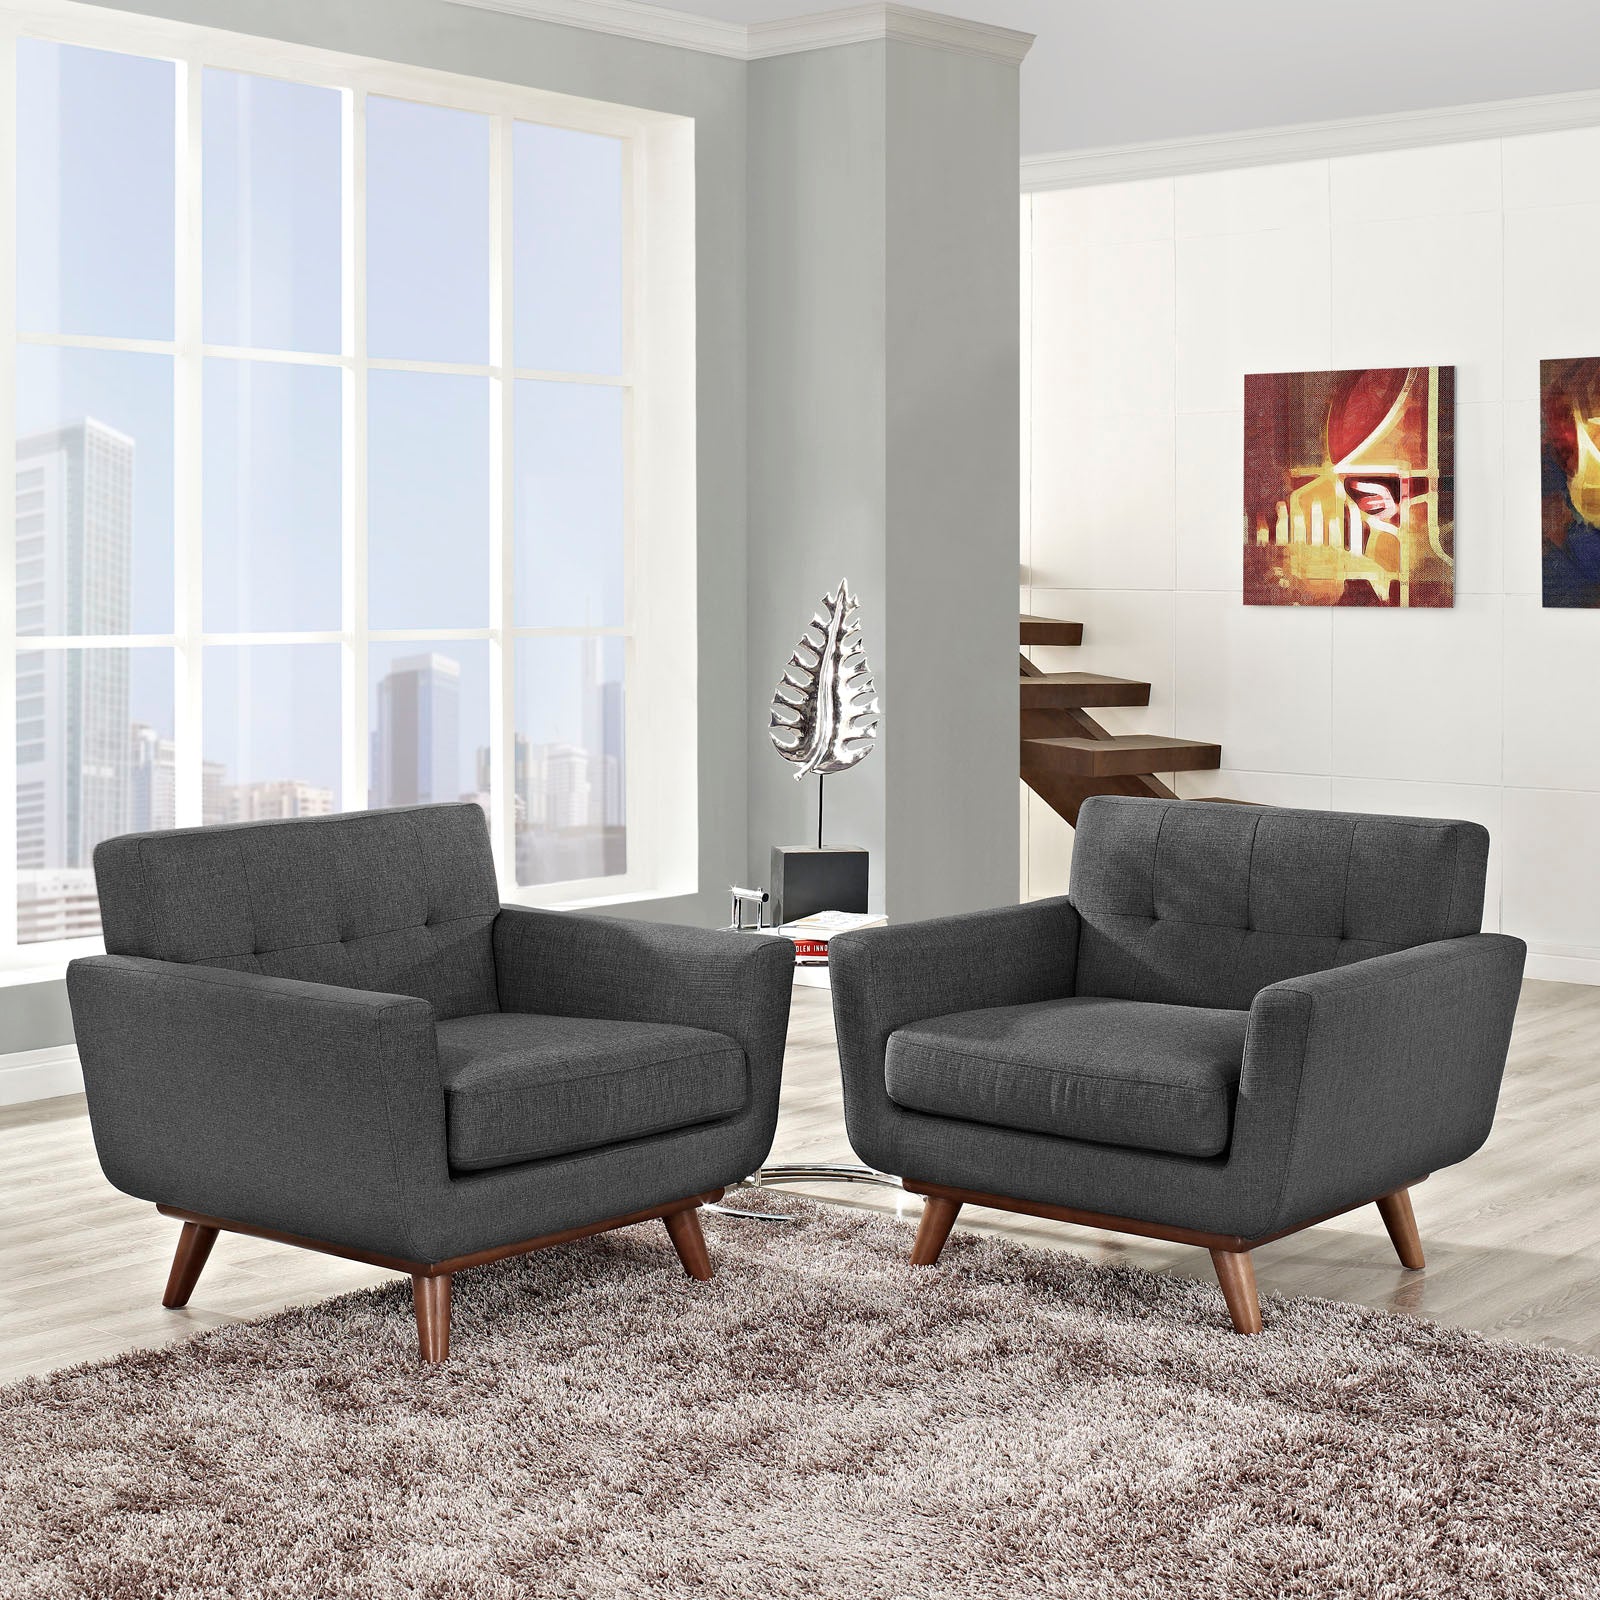 Modway Living Room Sets - Engage Armchair Wood ( Set of 2 ) Gray